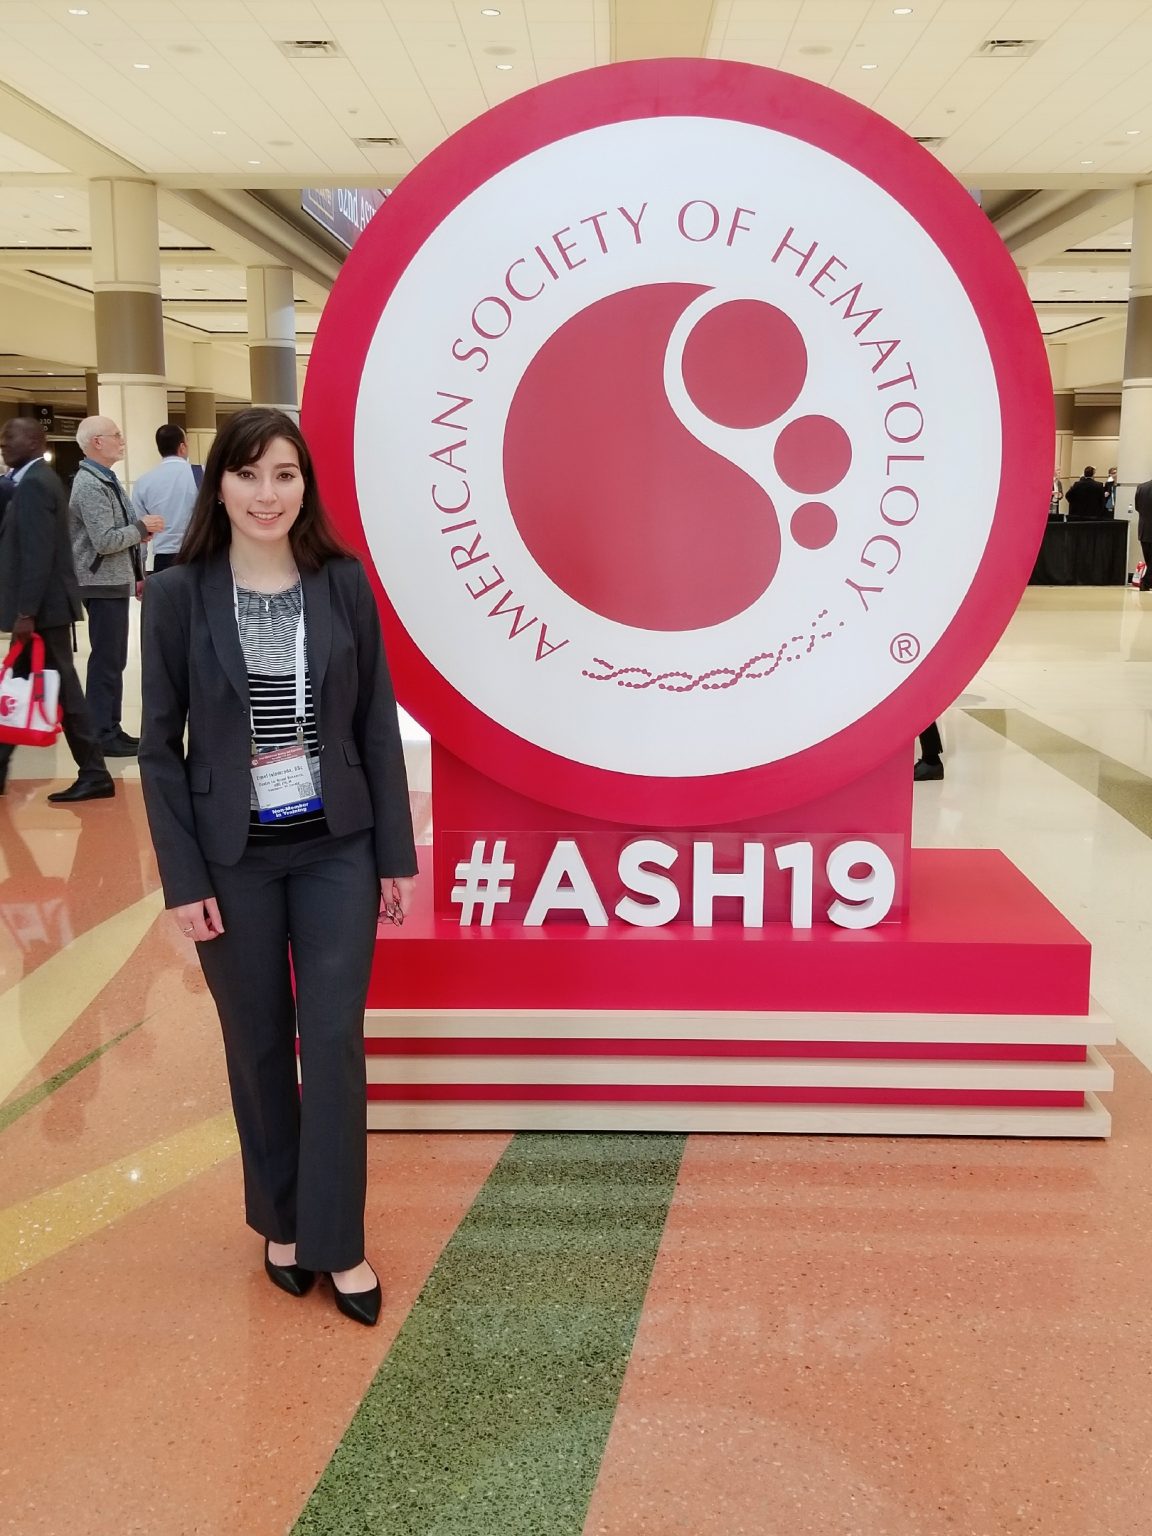 American Society of Hematology, 61st Annual Meeting in Orlando, FL